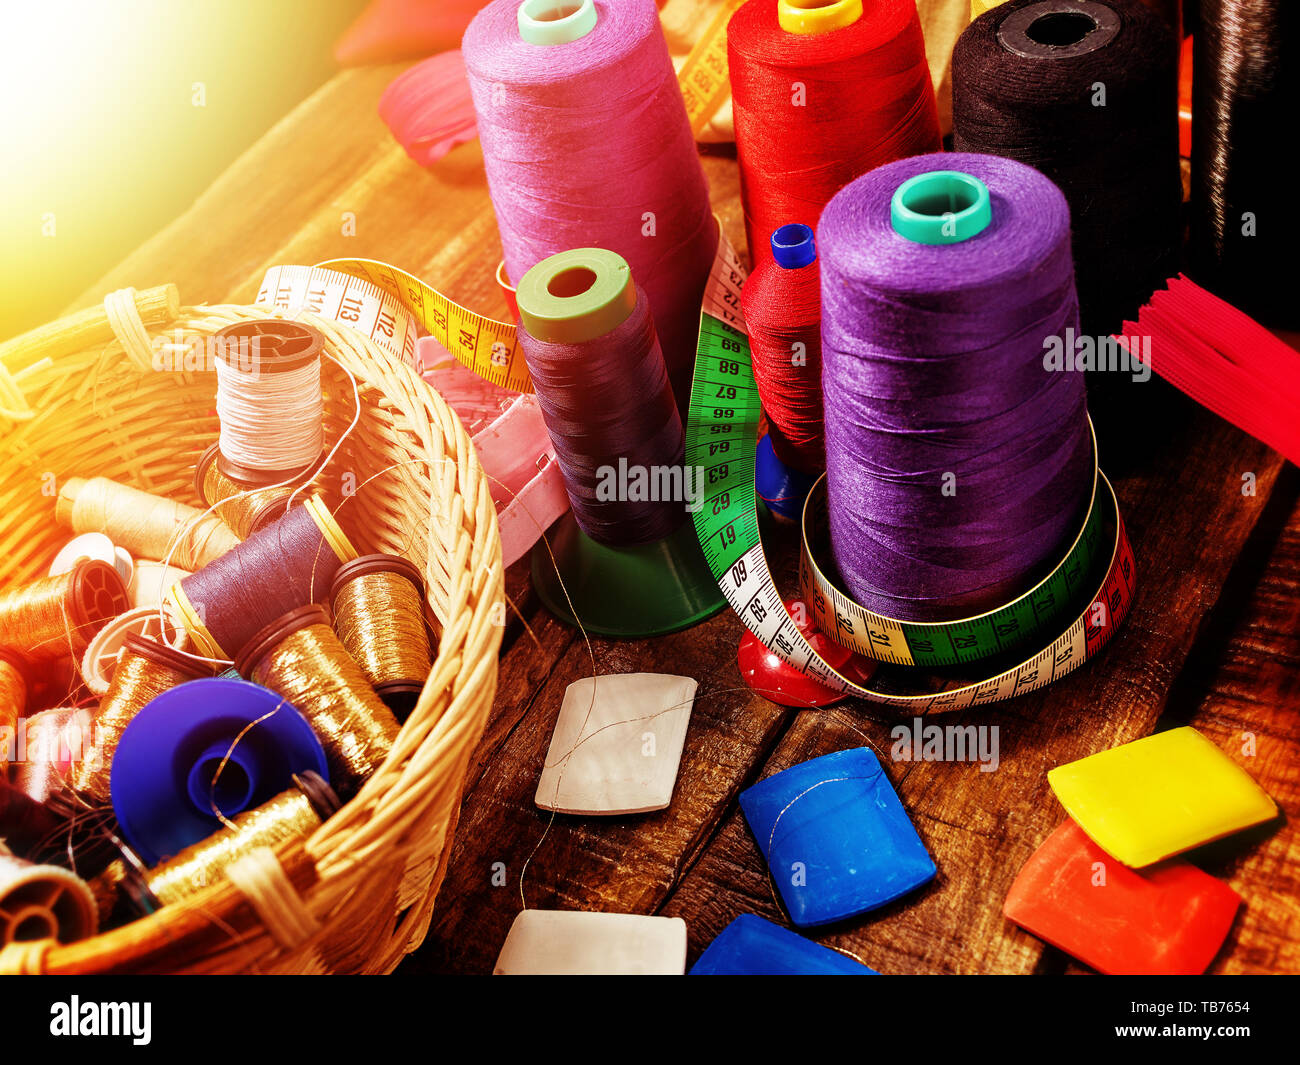 Sewing accessories fabric crayons, coil threads and measuring tape Stock Photo